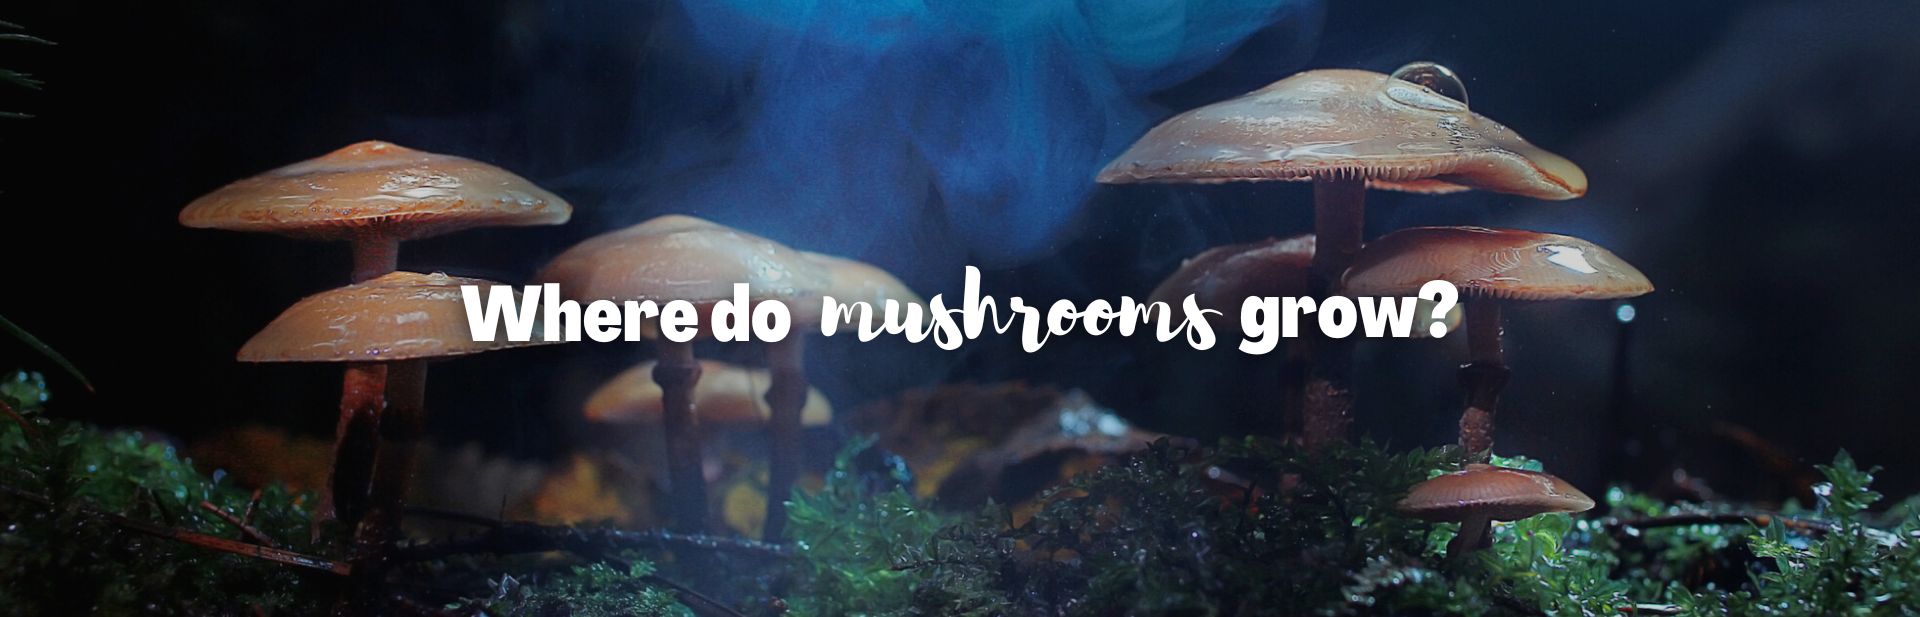 Where Do Mushrooms Grow? Explore the Secret World of Fungi and How to Find Them